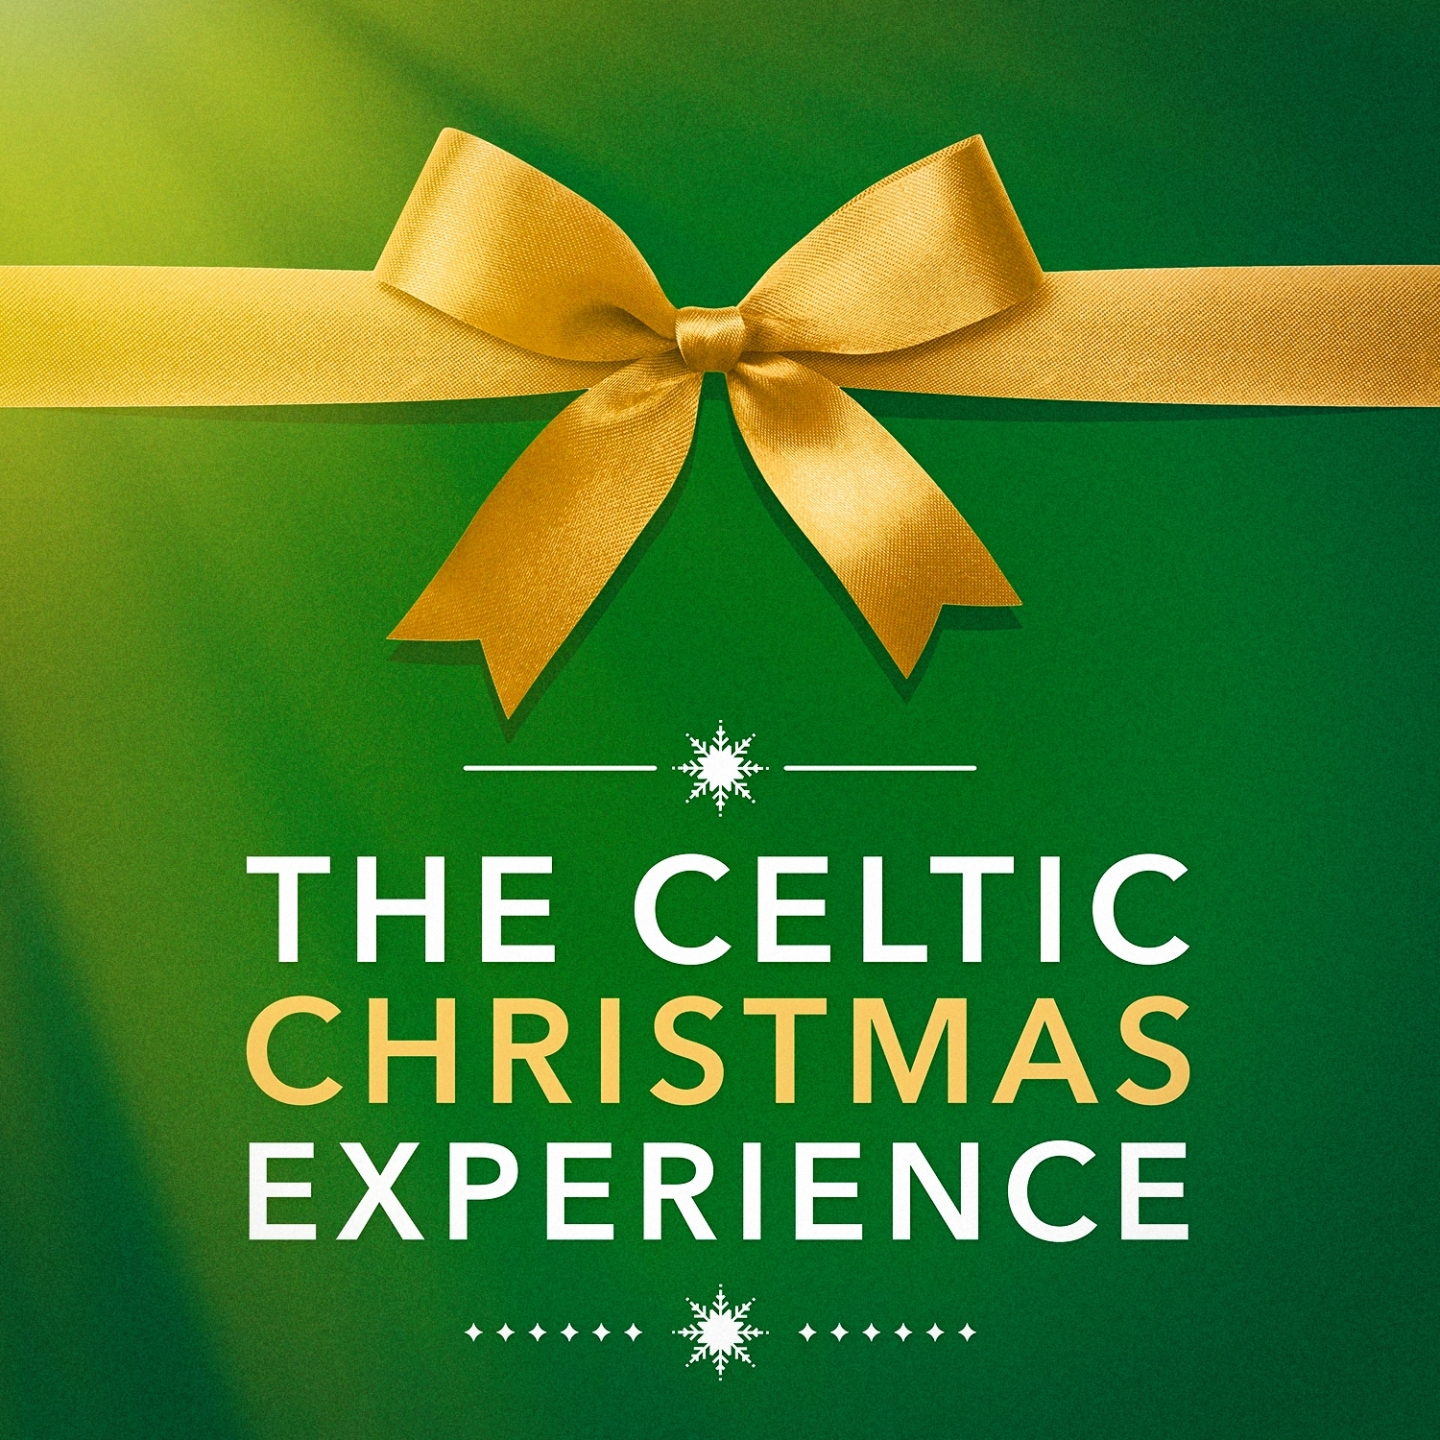 The Celtic Christmas Experience